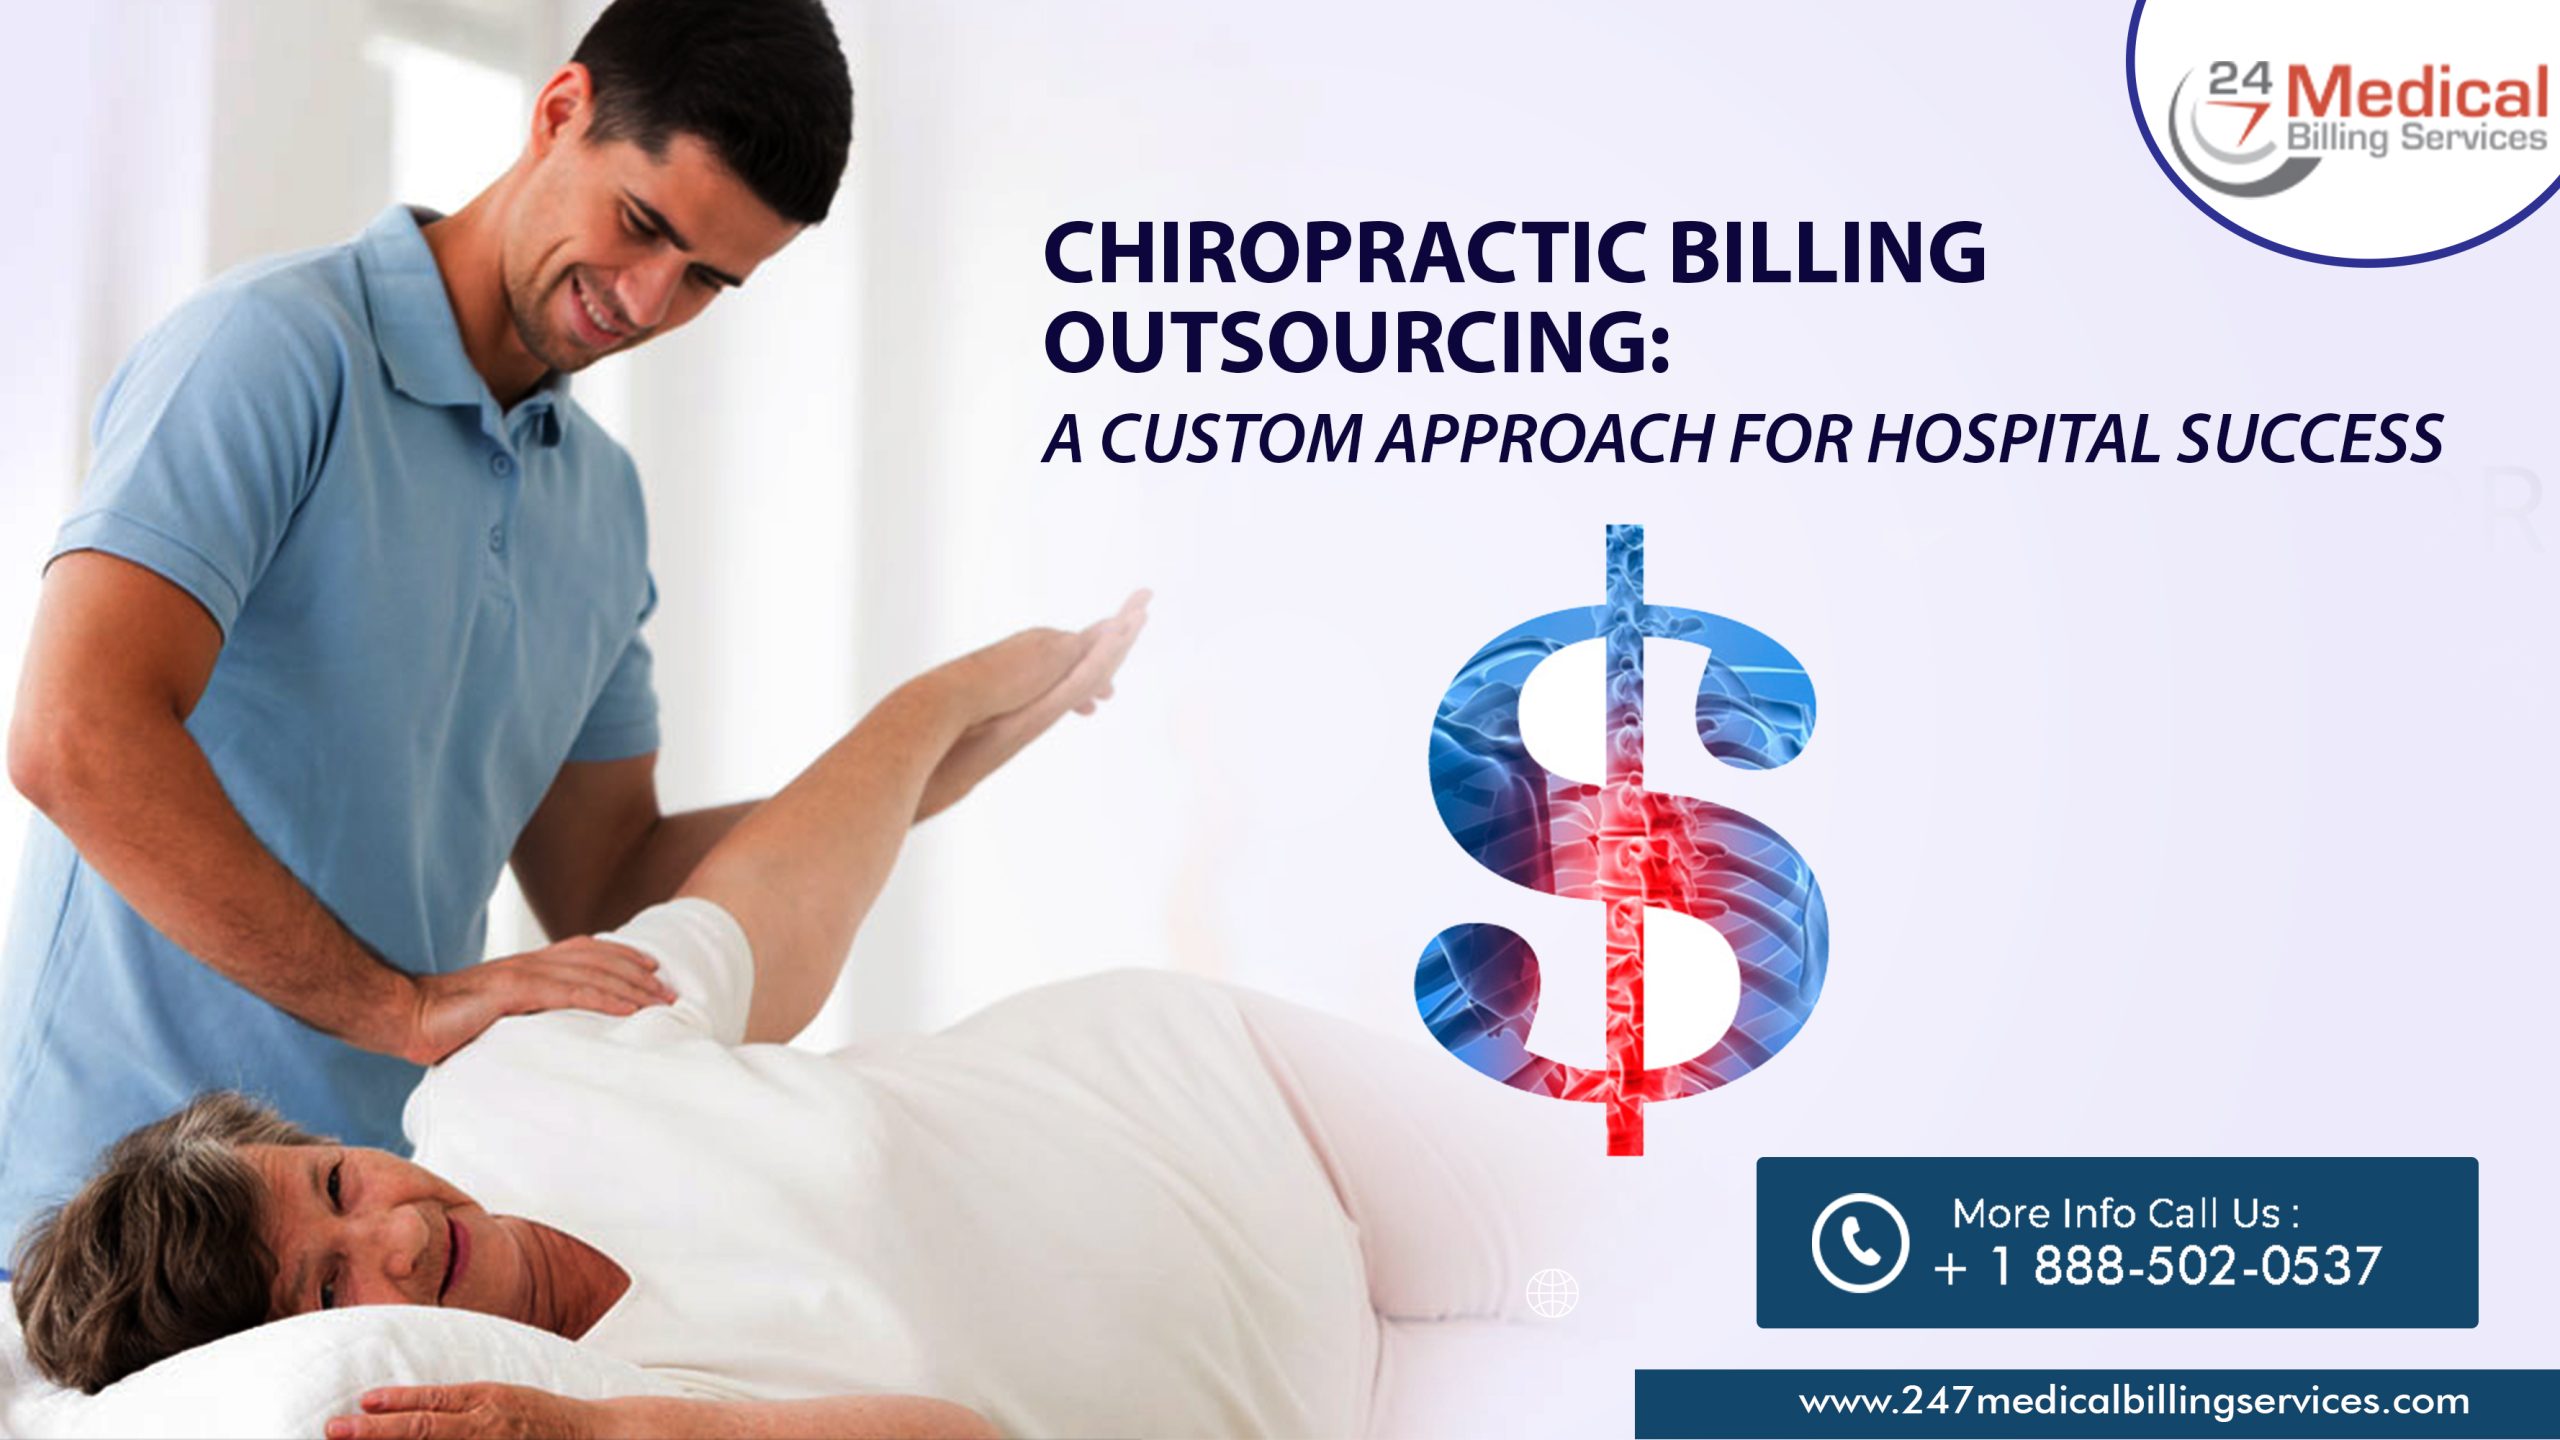  Chiropractic Billing Outsourcing: A Custom Approach for Hospital Success